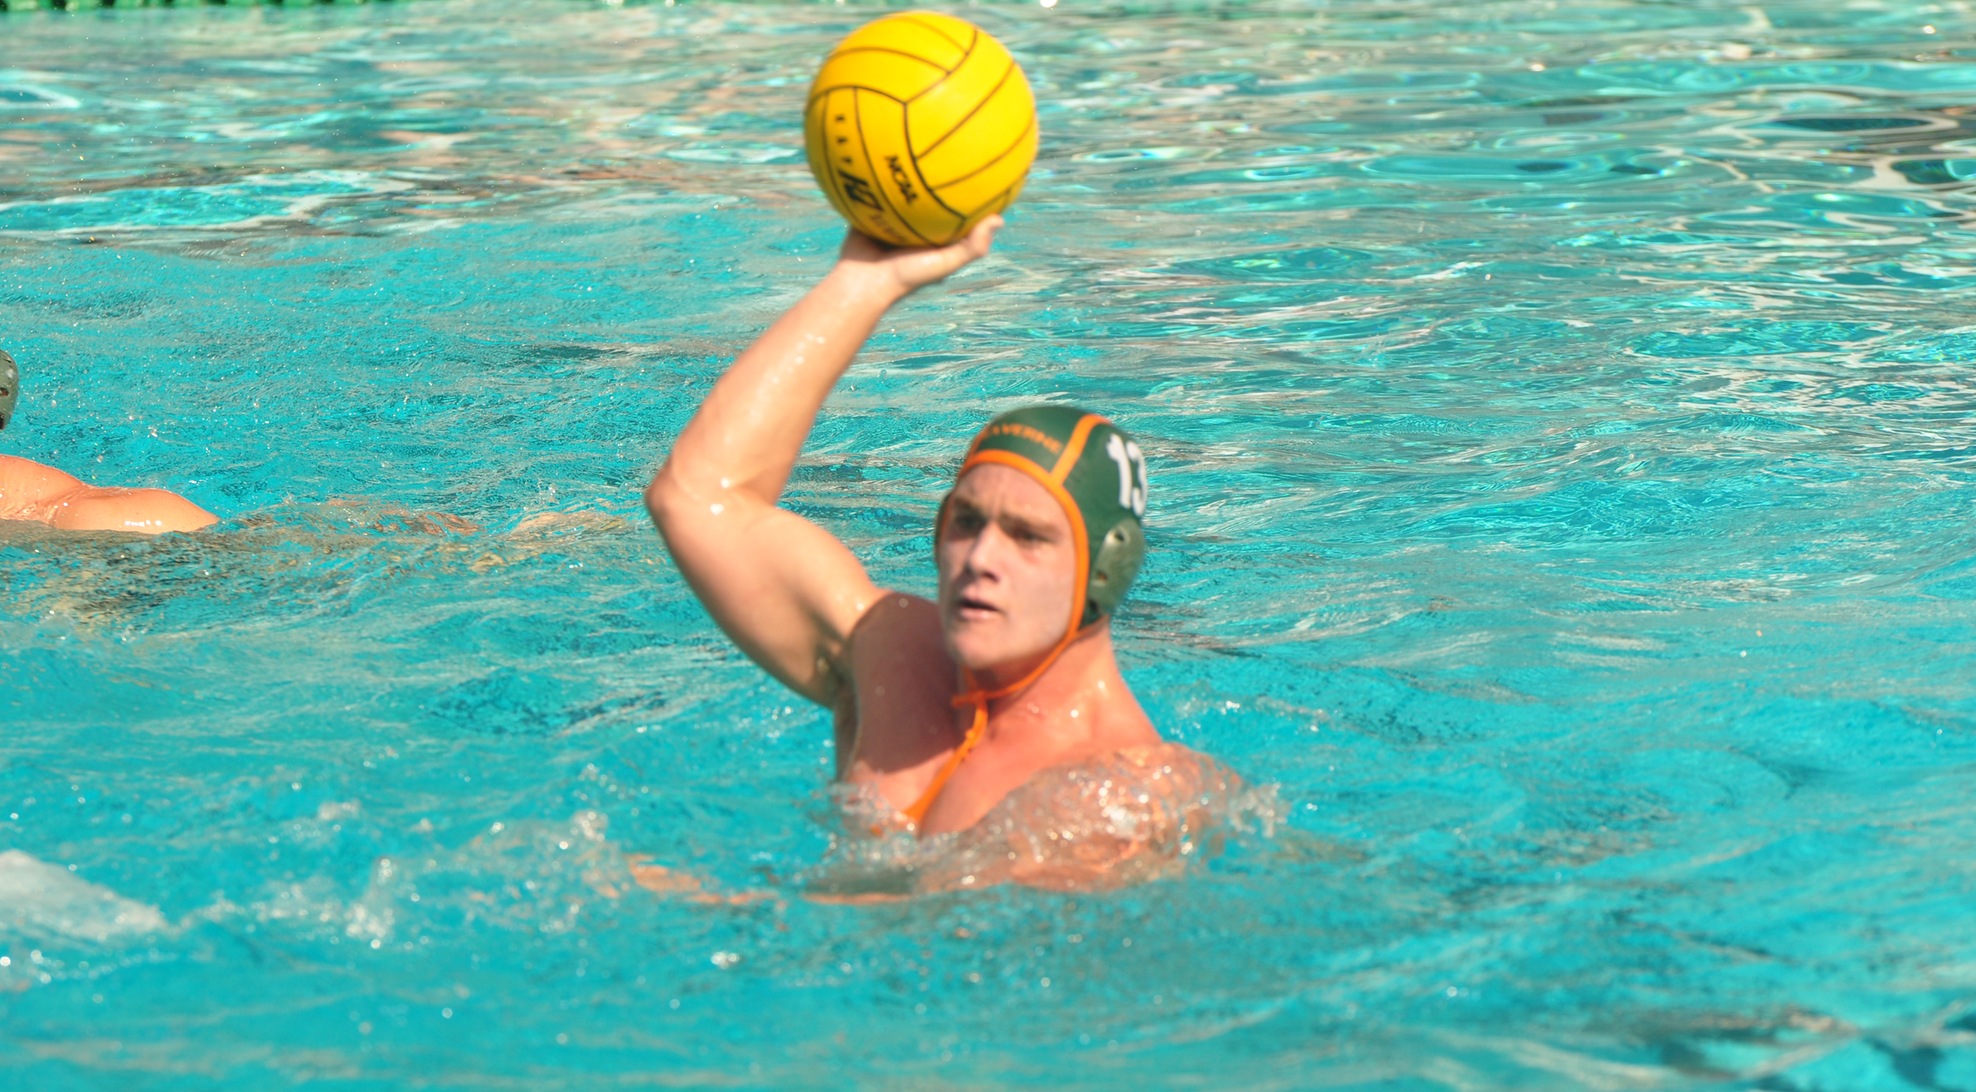 Men's Water Polo drops close game to Iona